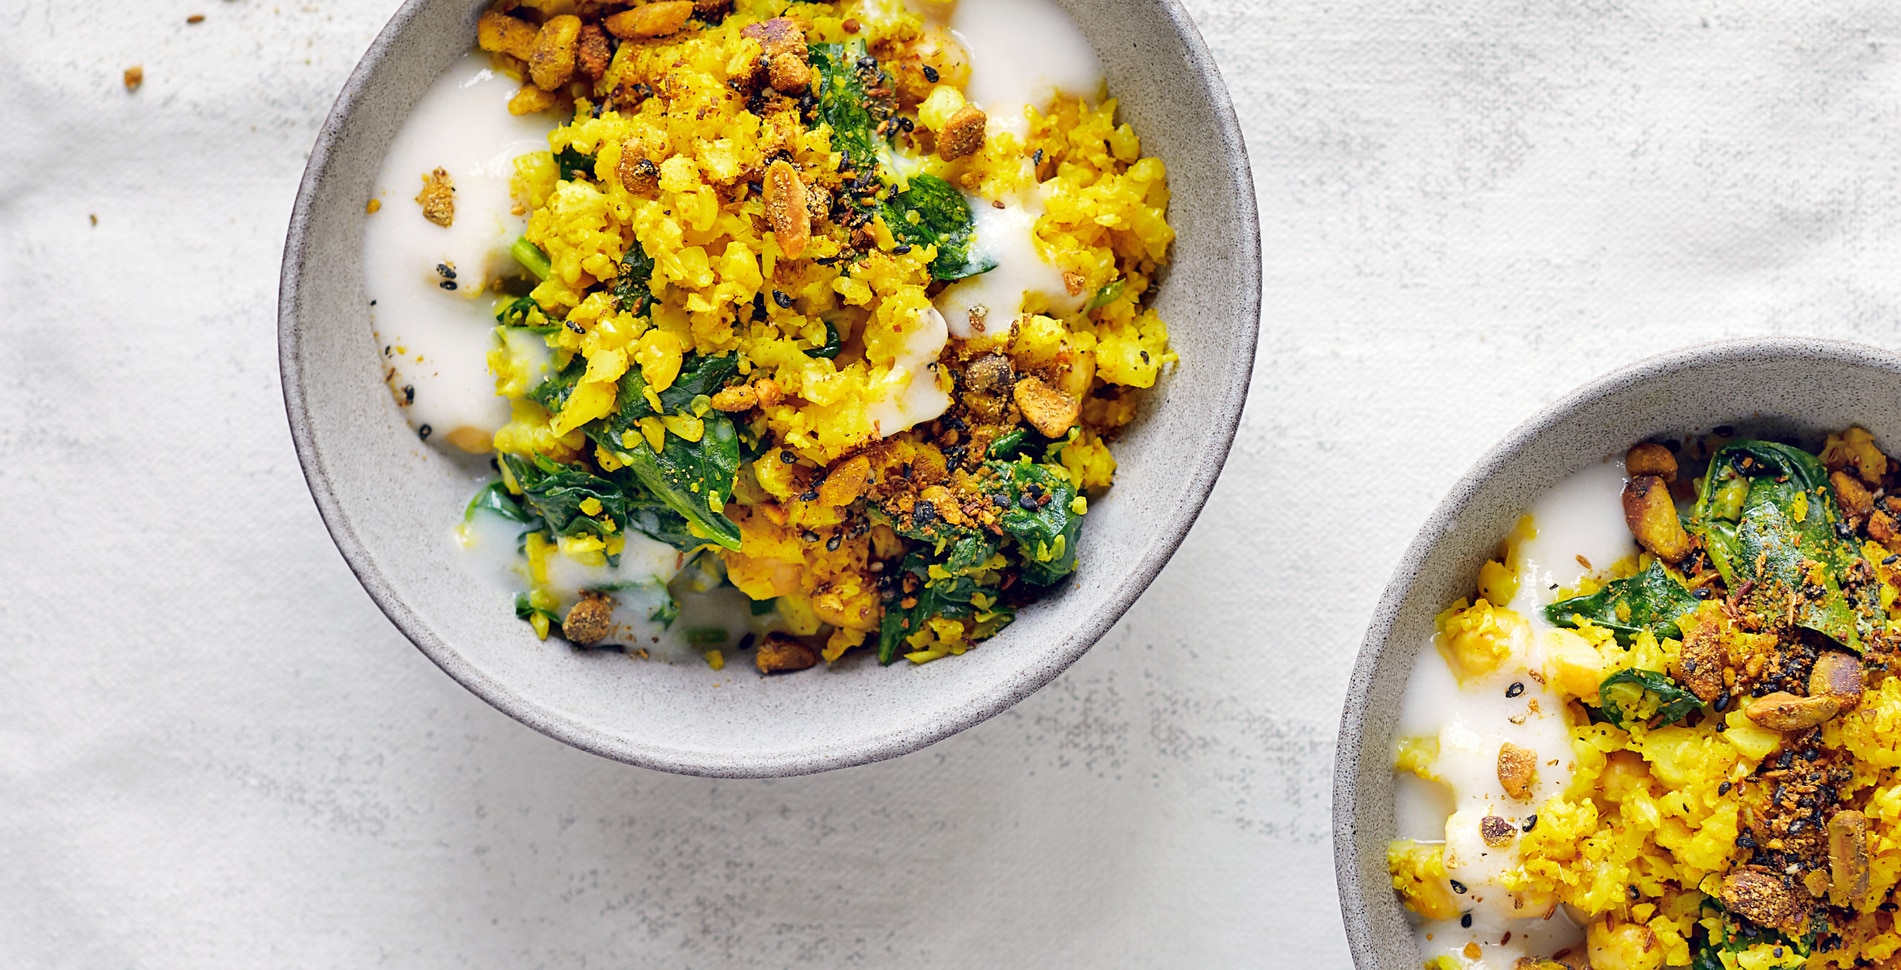 Riced Cauliflower Bowl With Chickpeas and Pistachio Dukkah